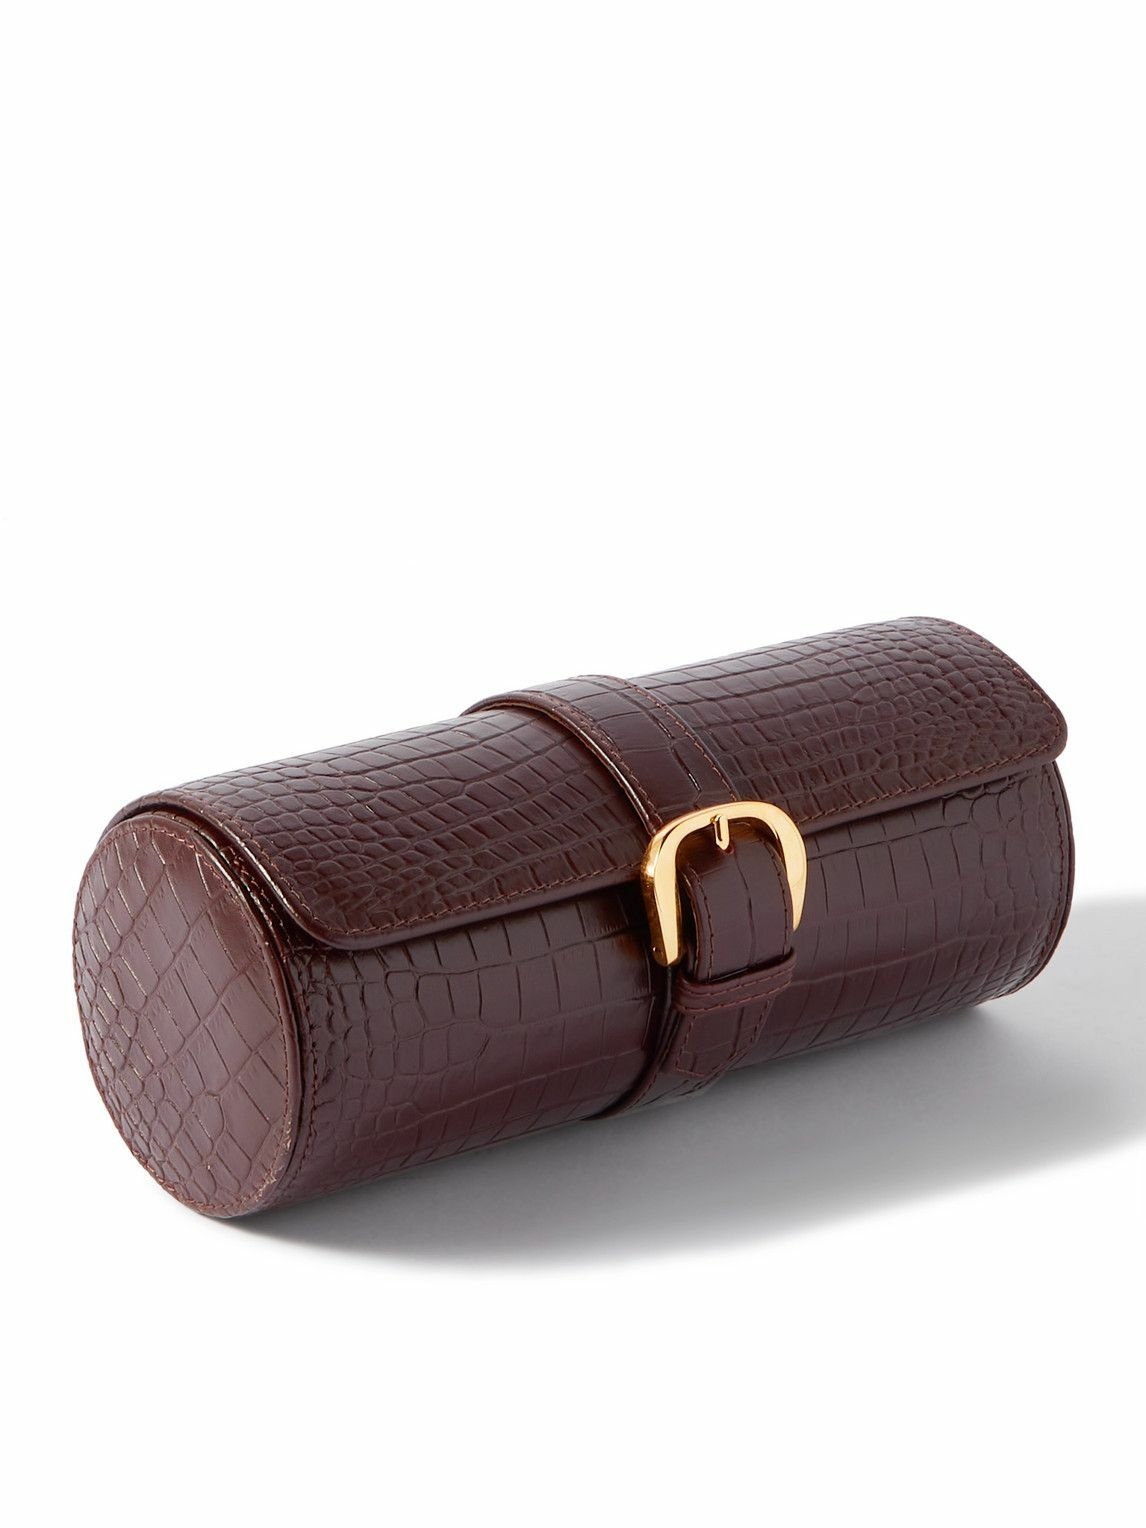 Photo: Rapport London - Croc-Effect Leather Watch Roll